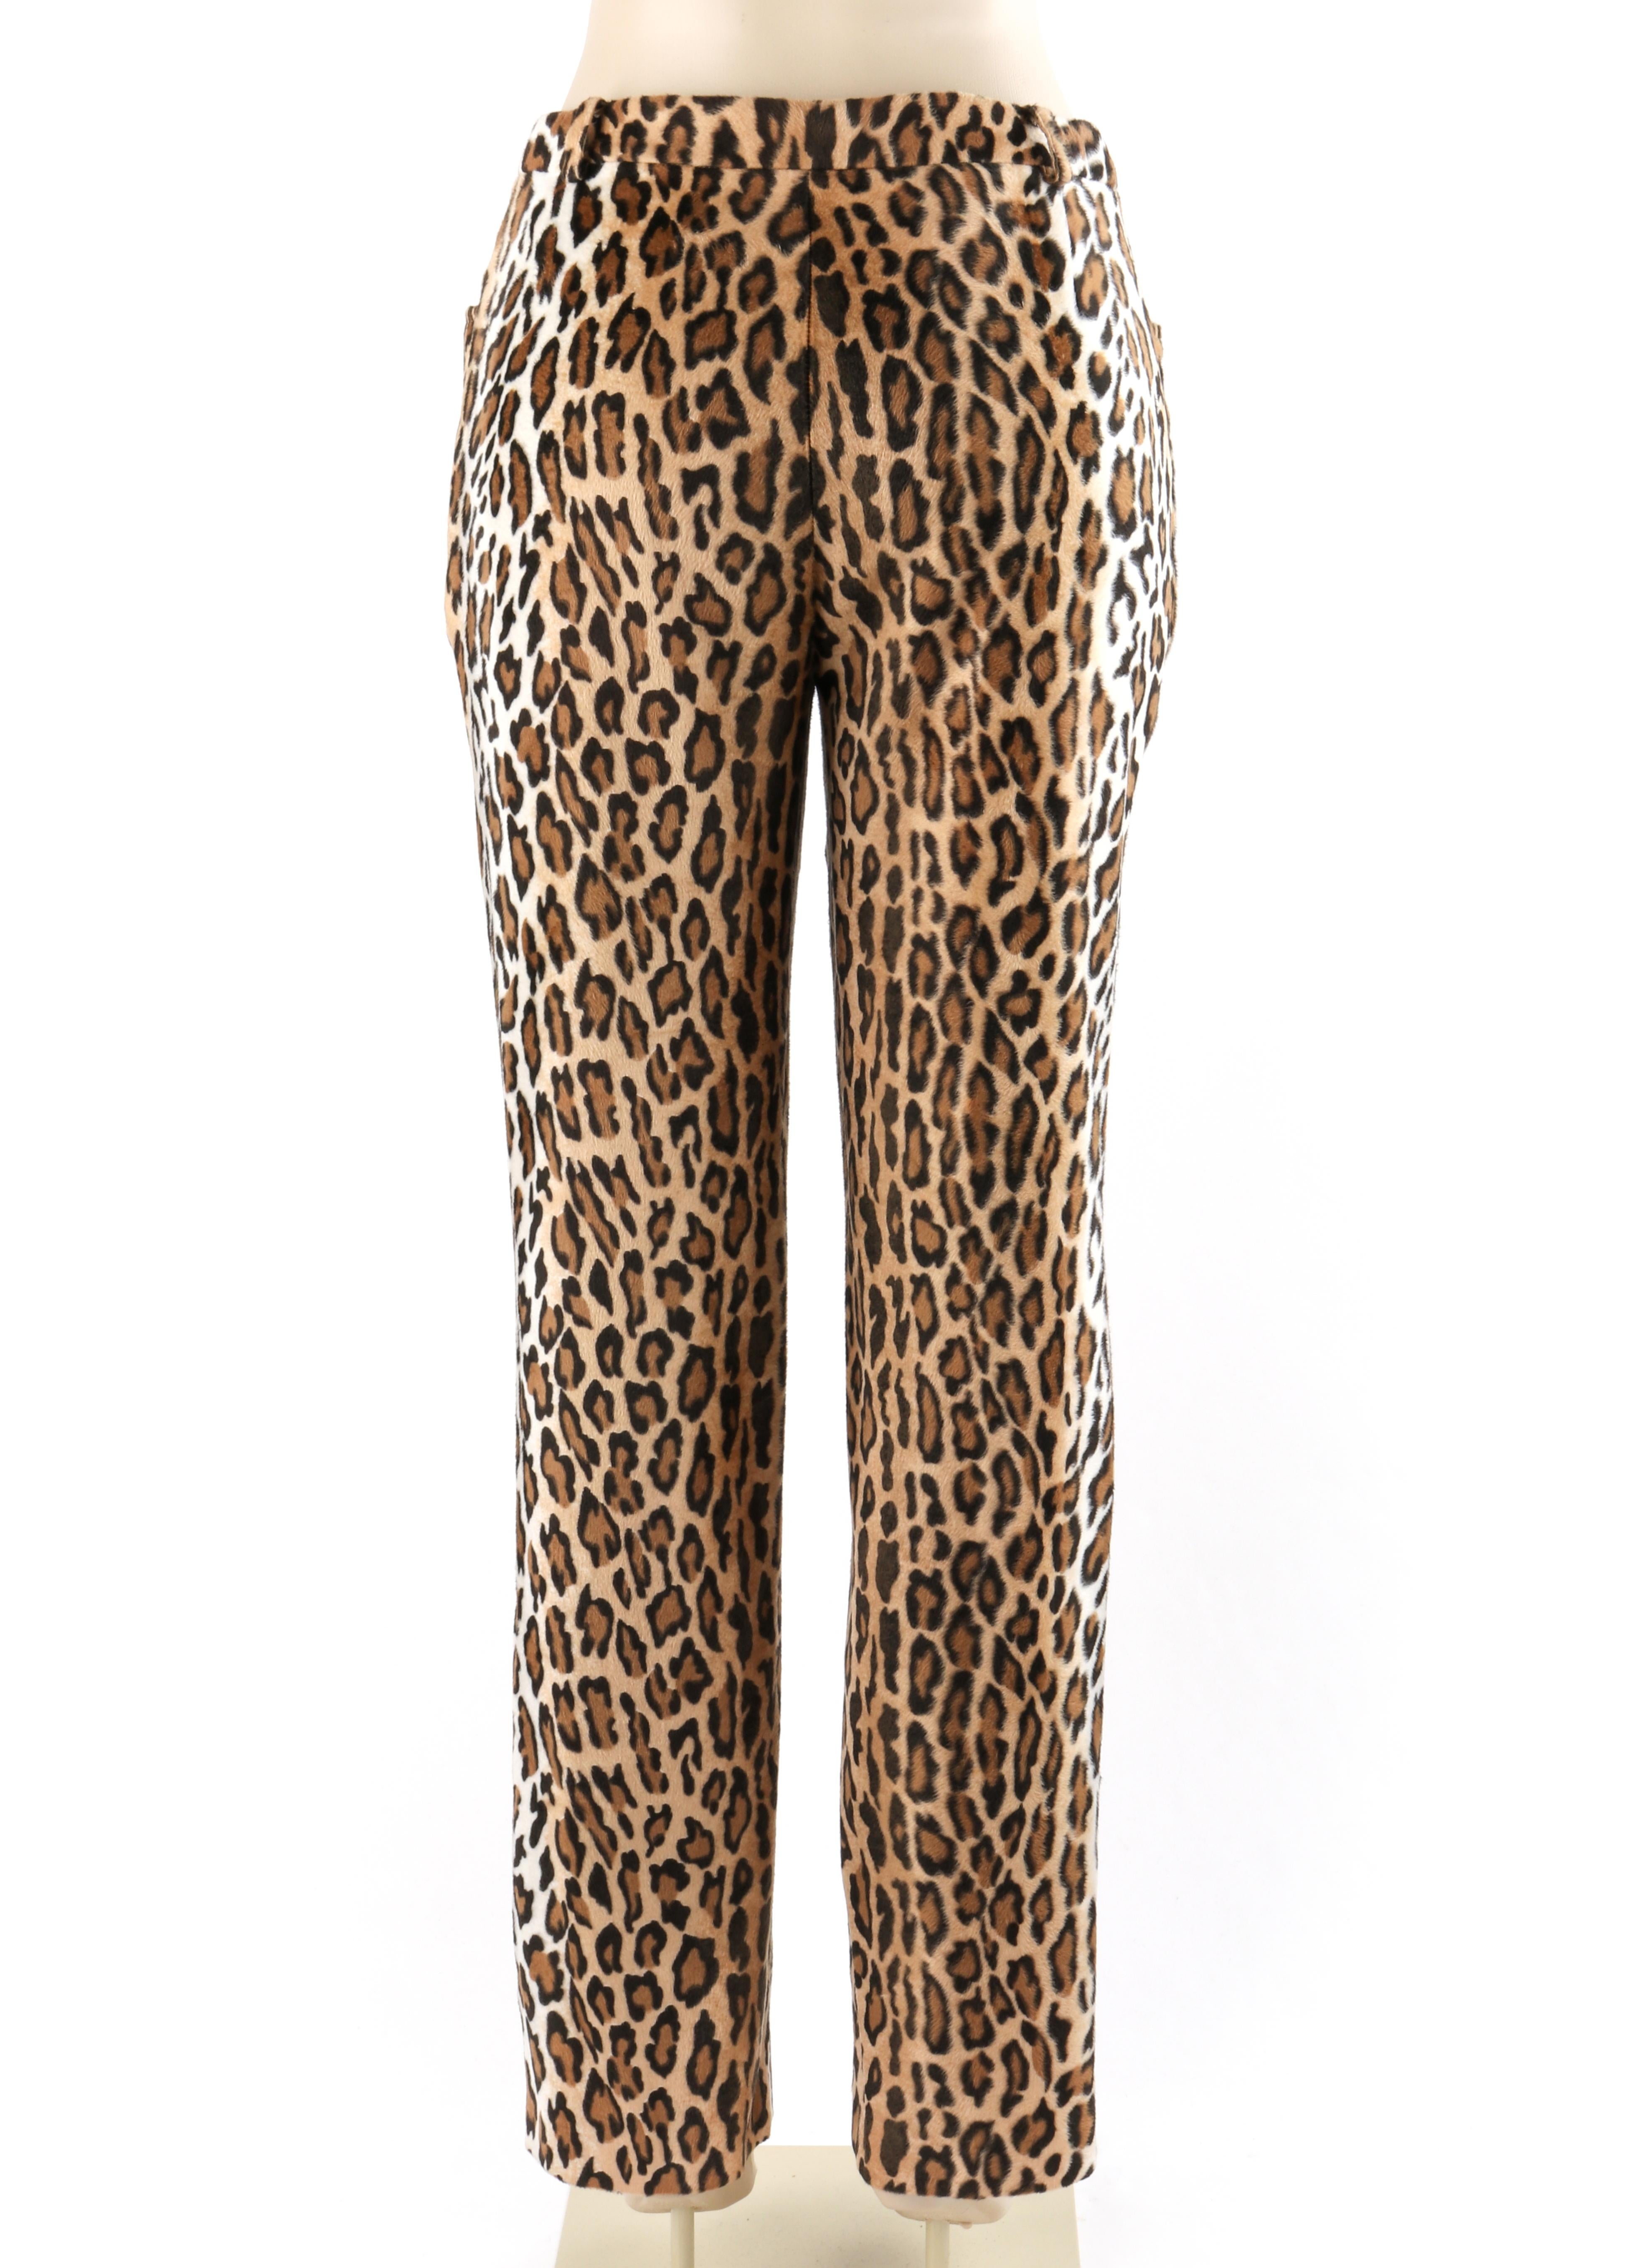 moschino leopard jeans